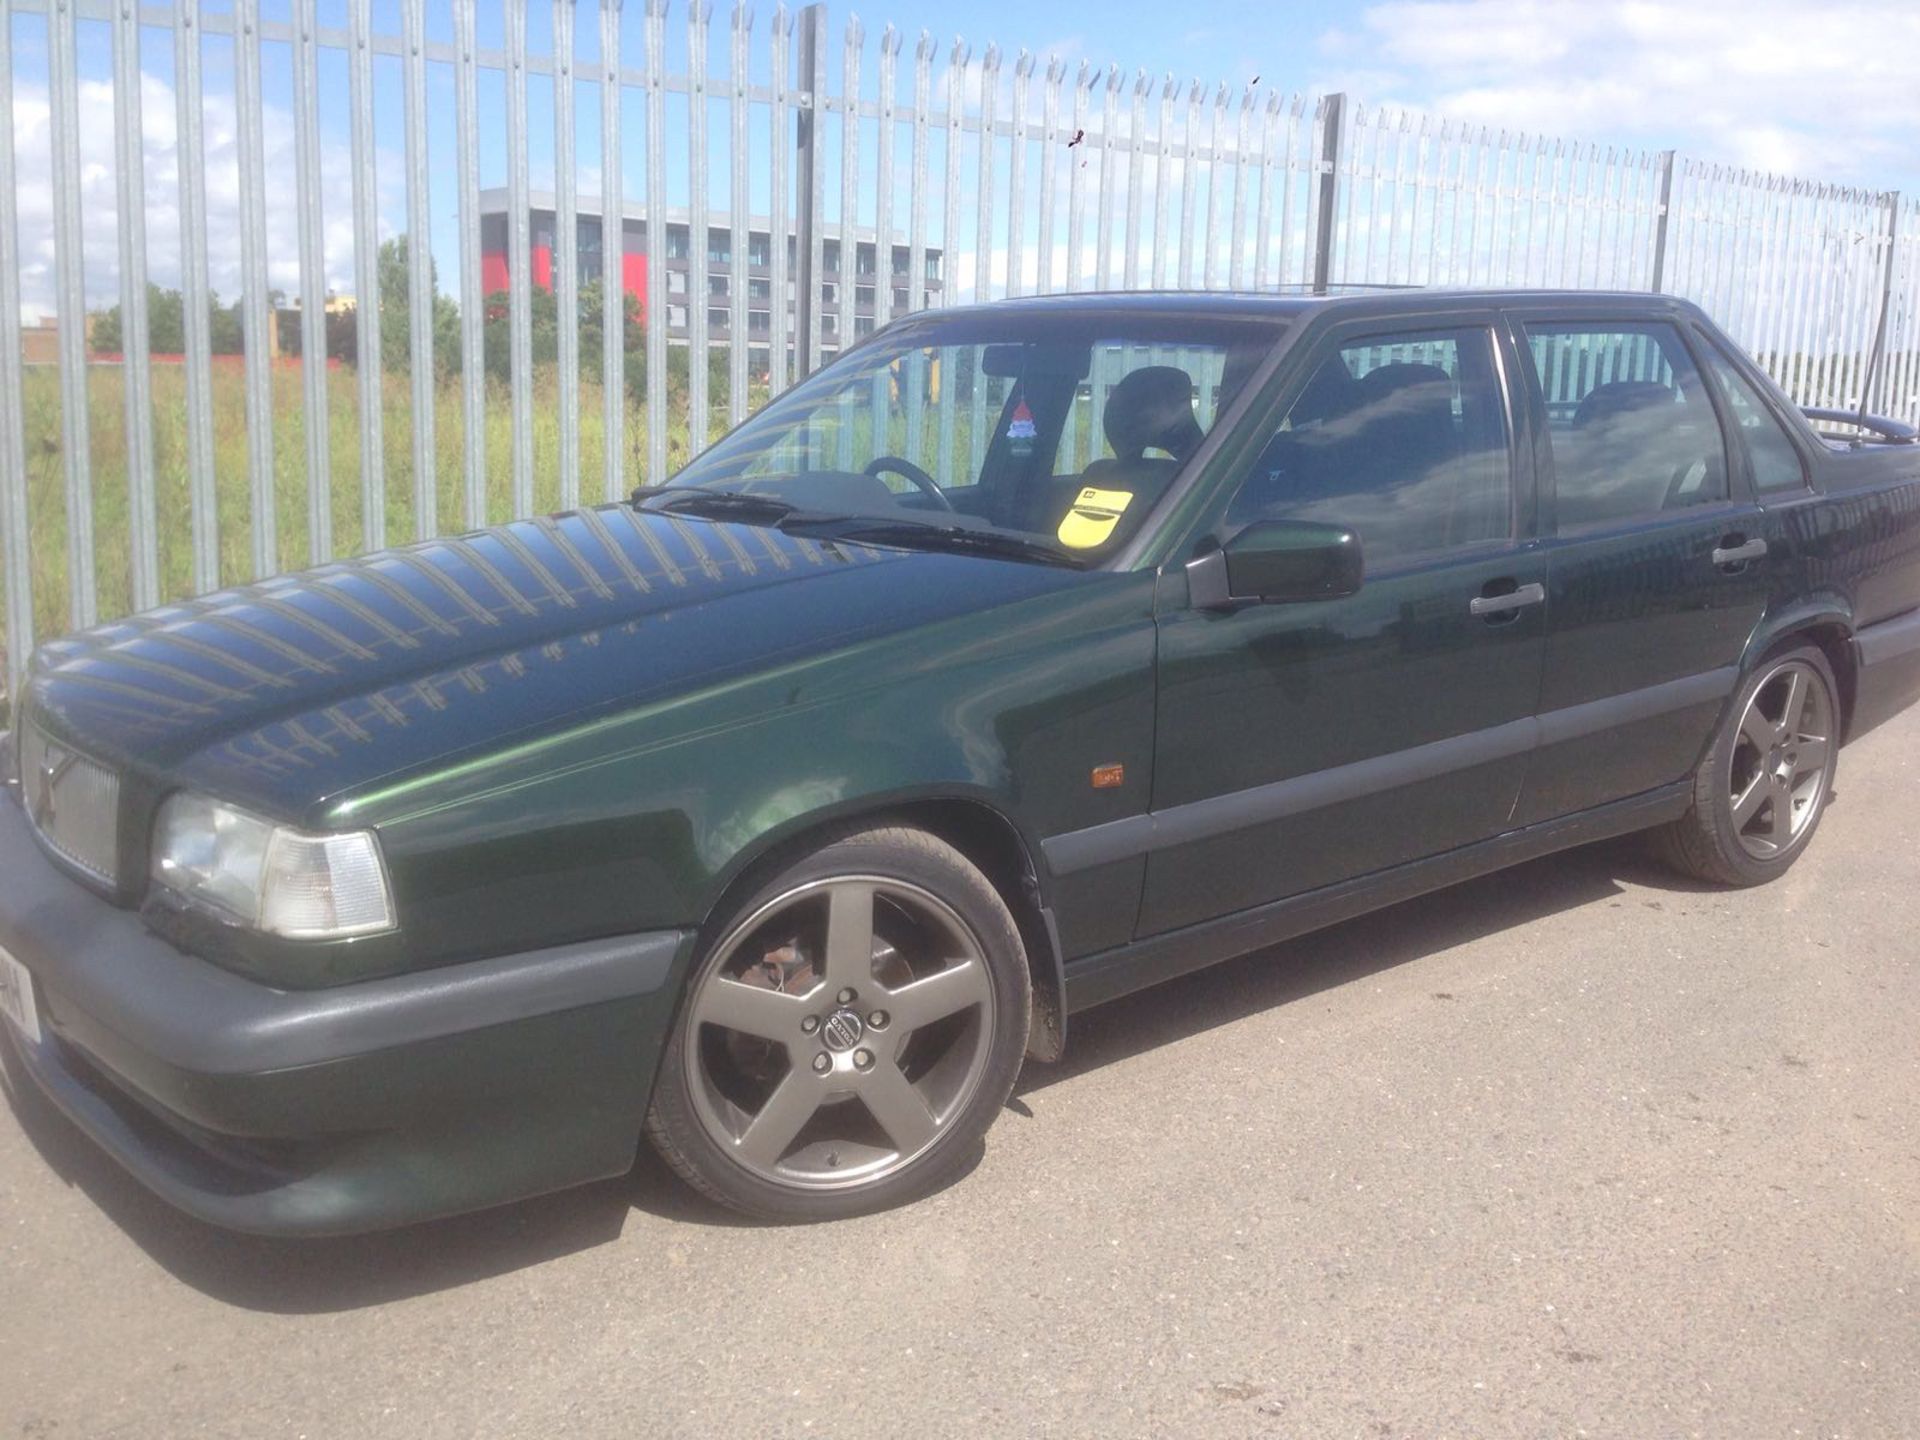 VOLVO T5-R saloon auto, 1995/N. olive green, - Image 2 of 16